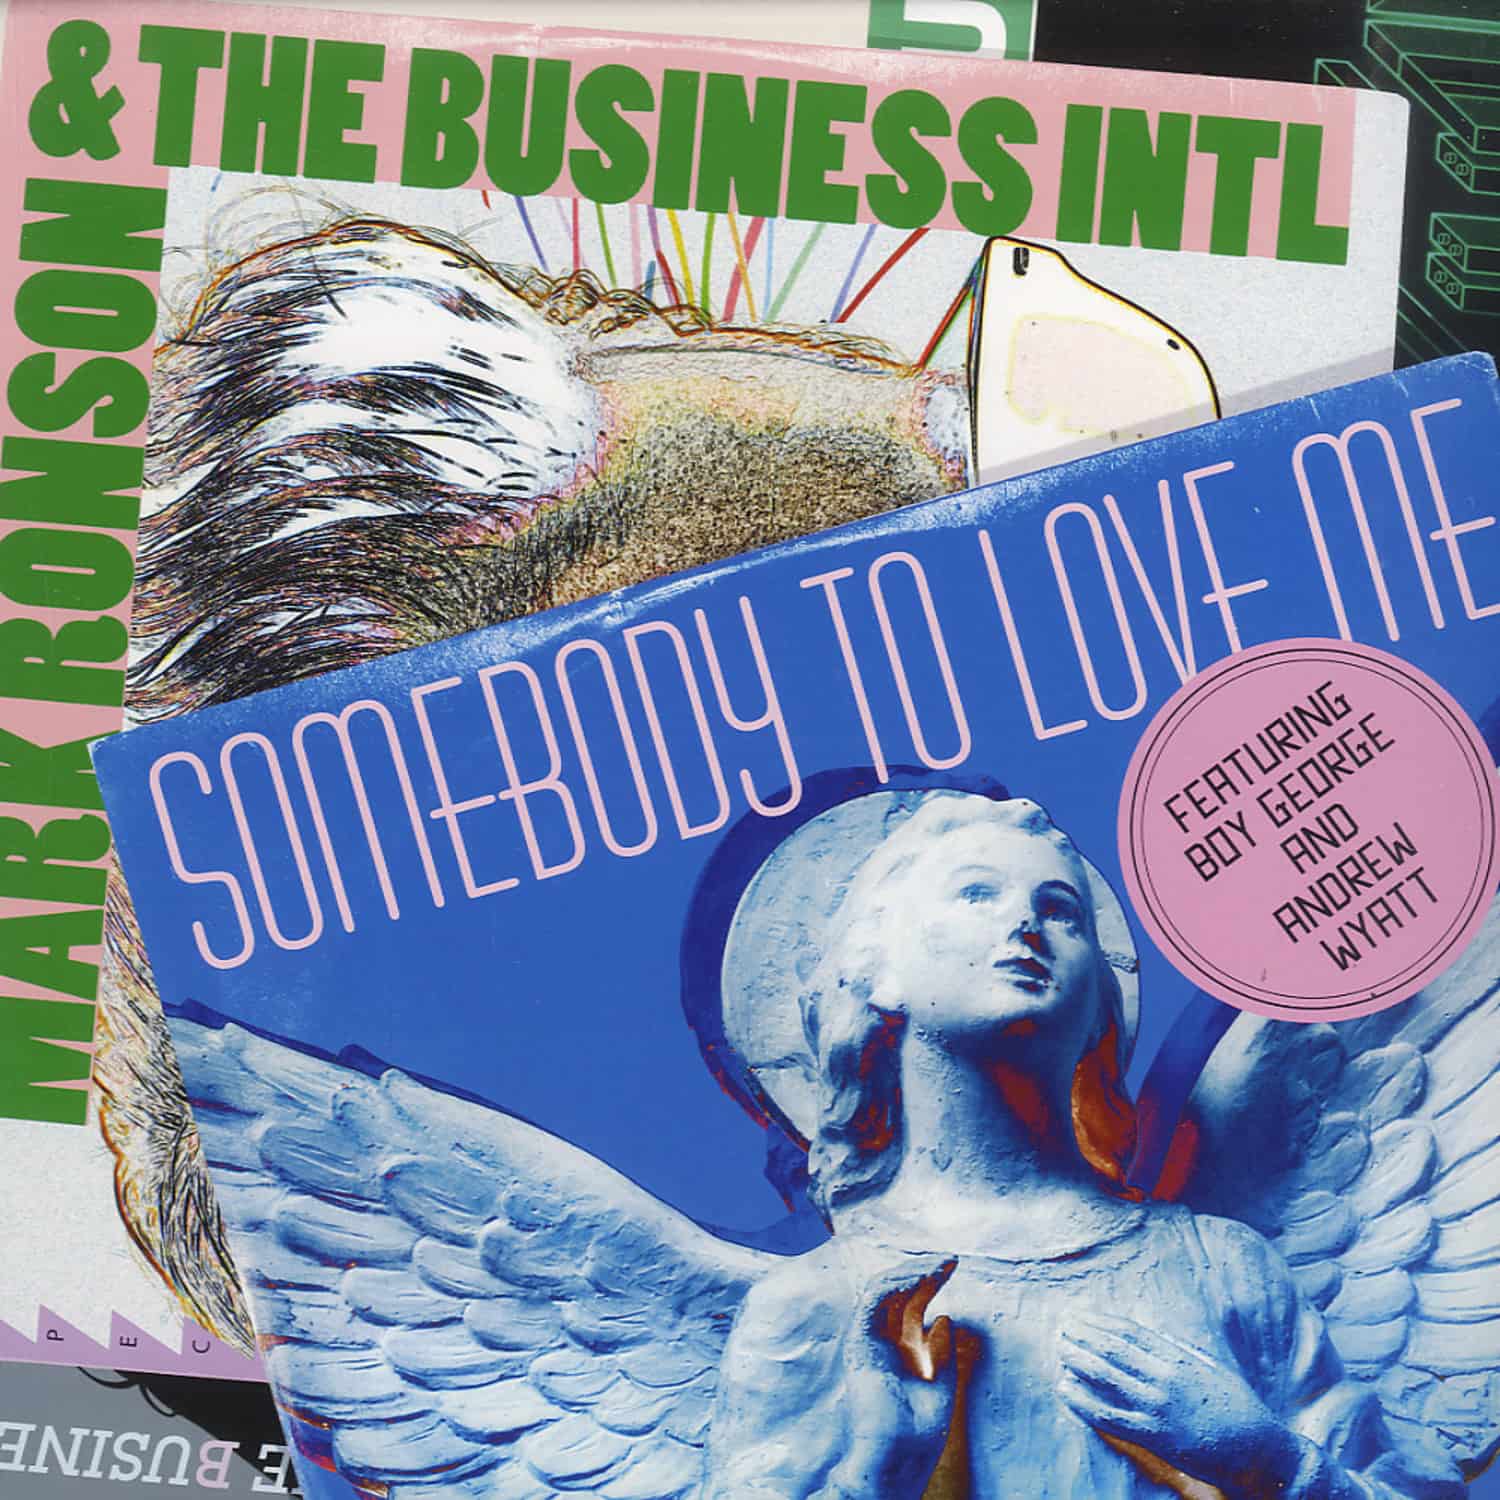 Mark Ronson & The Business Intl ft Boy George & Andrew Wyatt - SOMEBODY TO LOVE ME